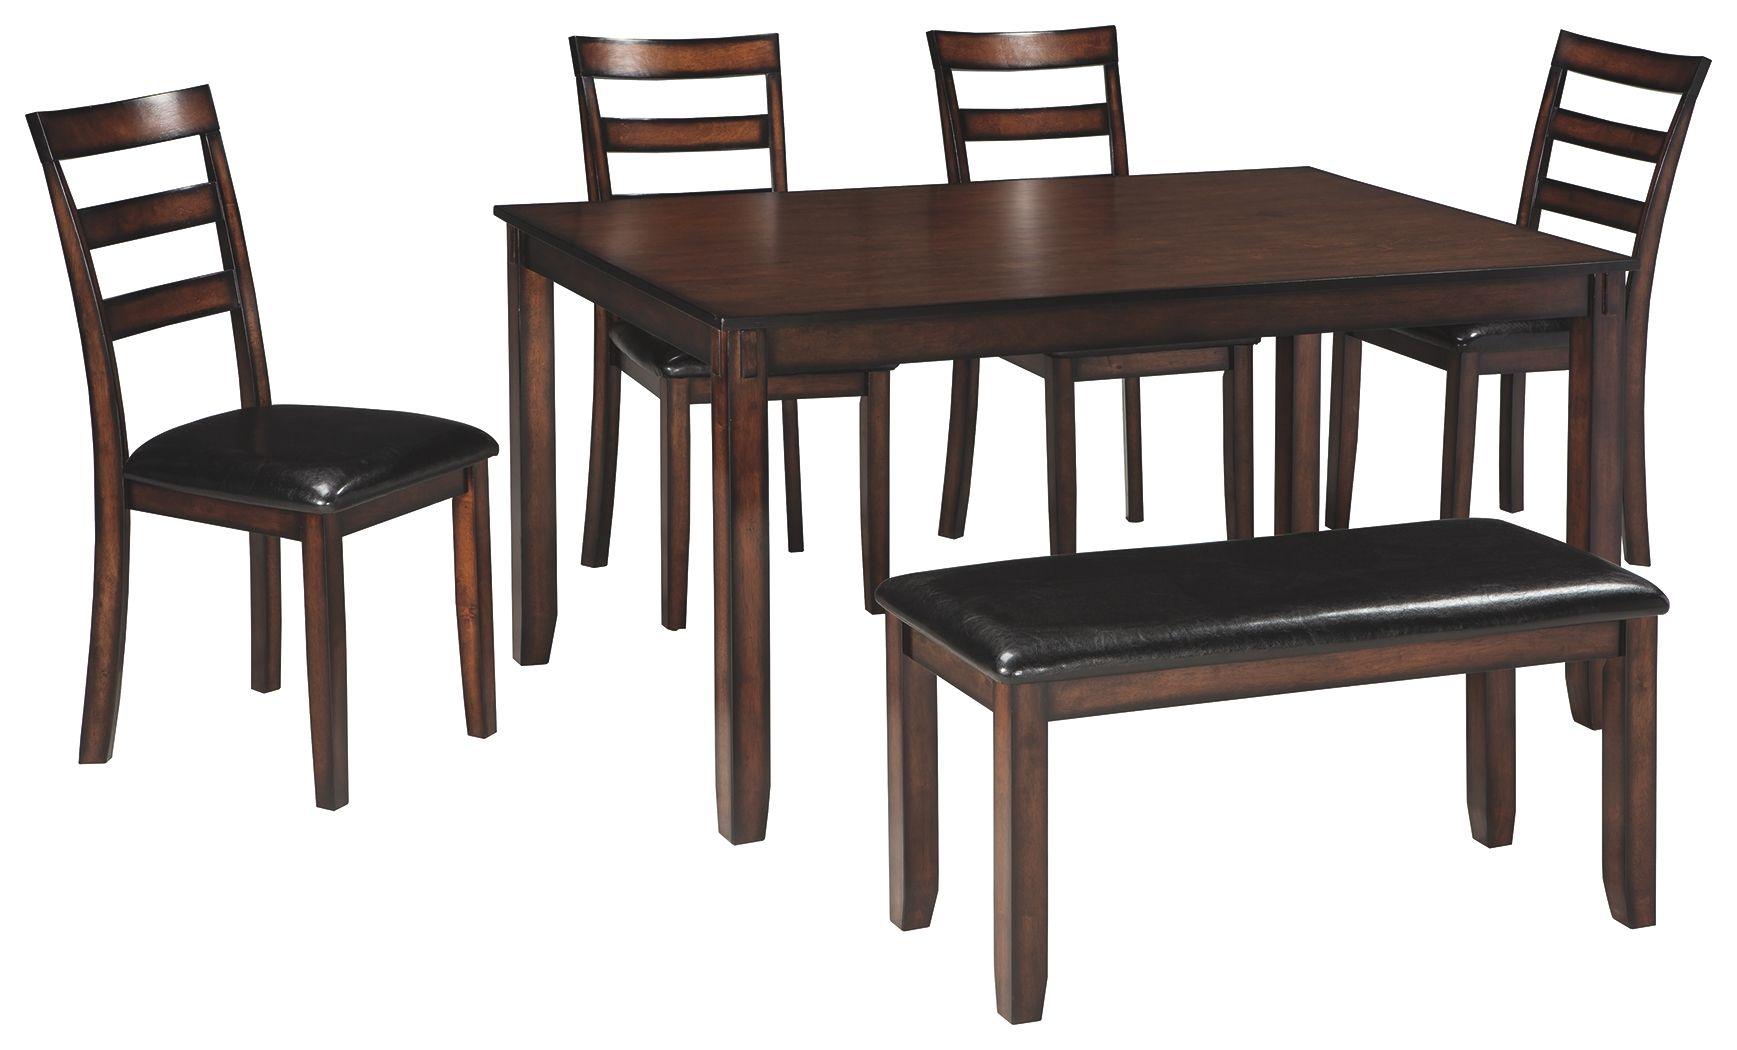 Ashley Furniture - Coviar - Brown - Dining Room Table Set (Set of 6) - 5th Avenue Furniture